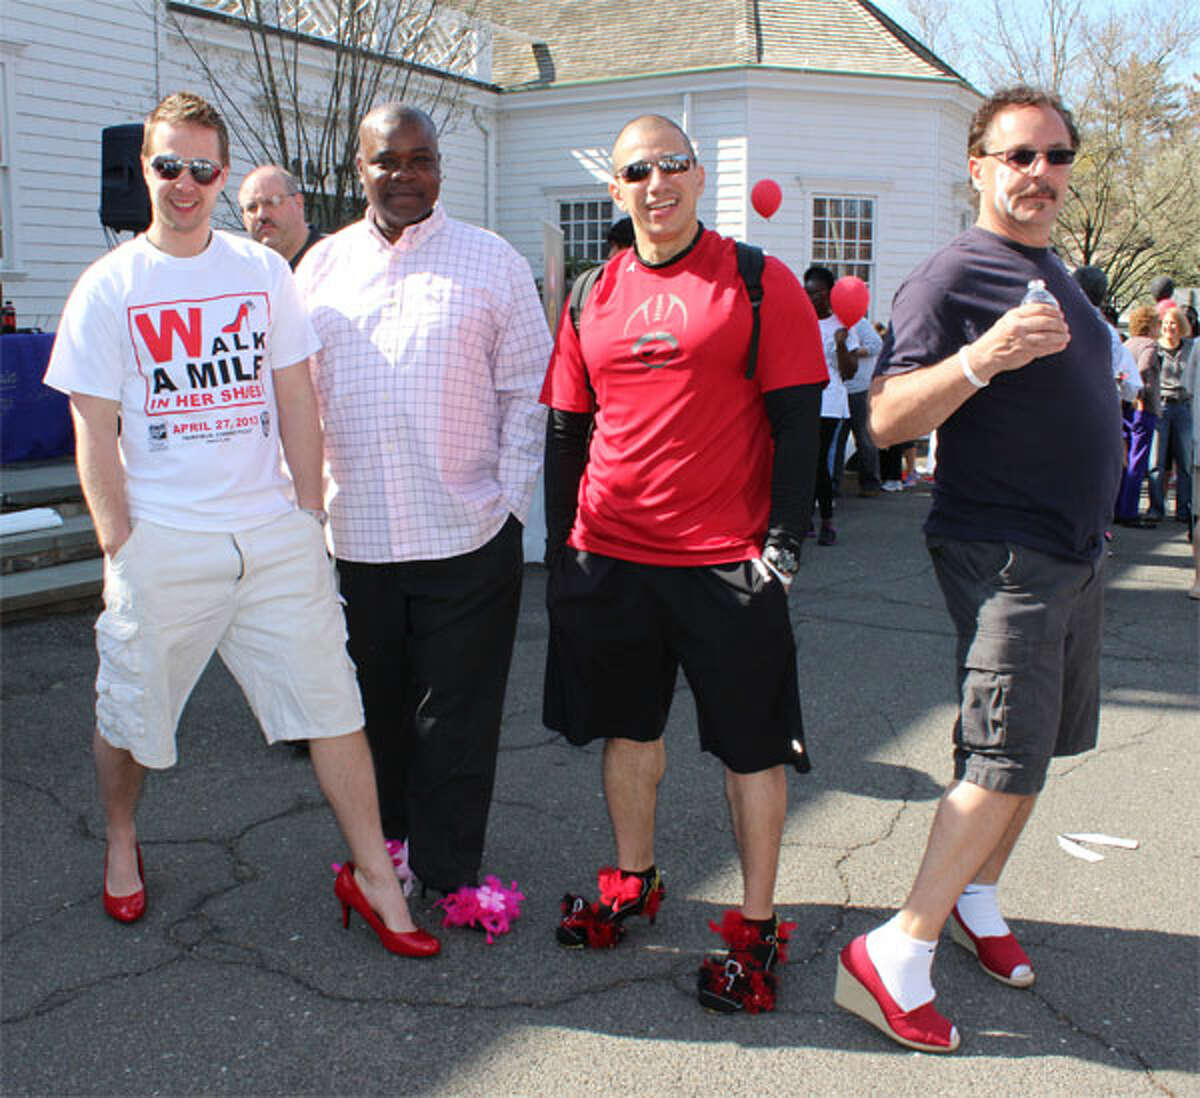 Among those donning feminine footwear for Walk a Mile in Her Shoes on April 27 in Fairfield are, from left, Daniel Chizmadia of Shelton, from Leadership Greater Bridgeport; Martin Goodrich of Bridgeport, Raul Barada of Bridgeport, both from St. Vincent’s Special Needs; and Bill Truini of Monroe, from the Stepney Fire Department. (Photo by John Kovach)